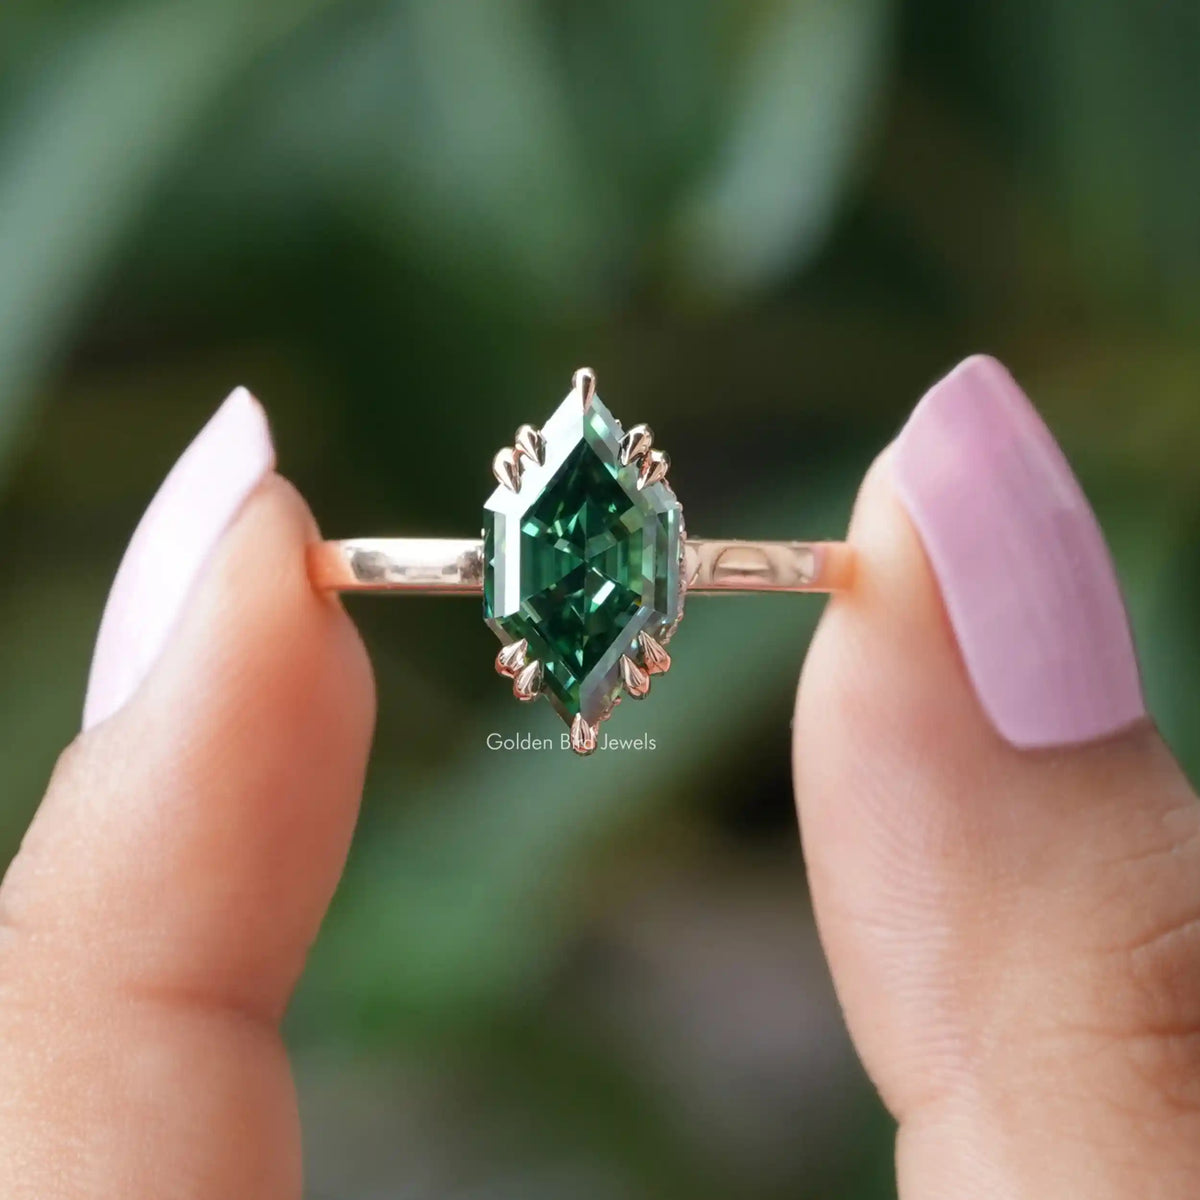 [Front view of green dutch marquise cut solitaire ring in 14k yellow gold]-[Golden Bird Jewels]